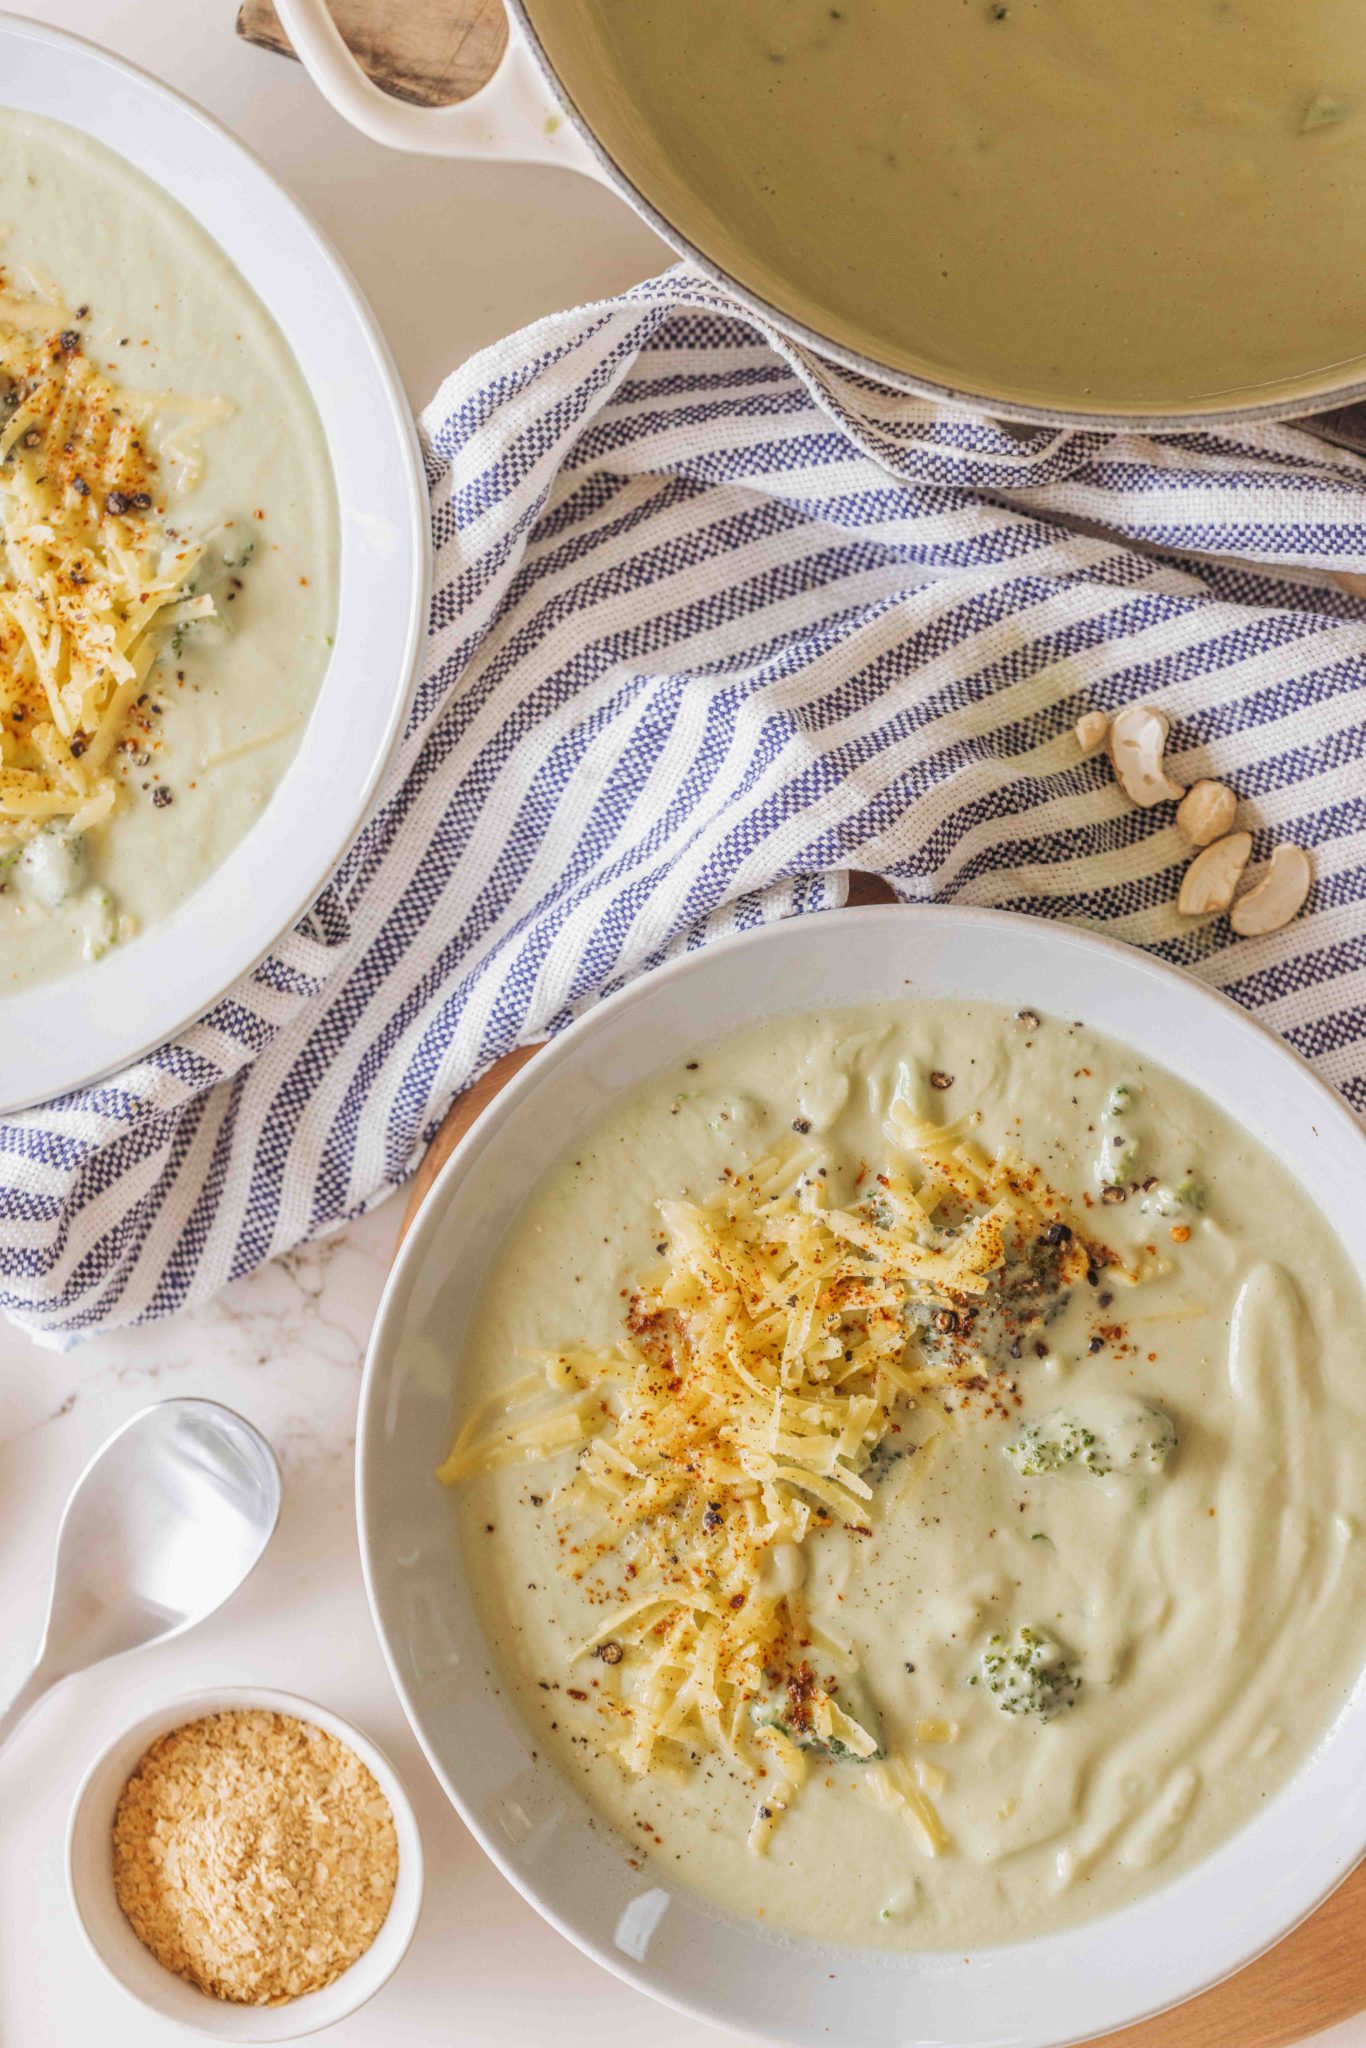 Two bowls of creamy broccoli soup, topped with grated cheese and red chilli flakes, with cashews on the side.